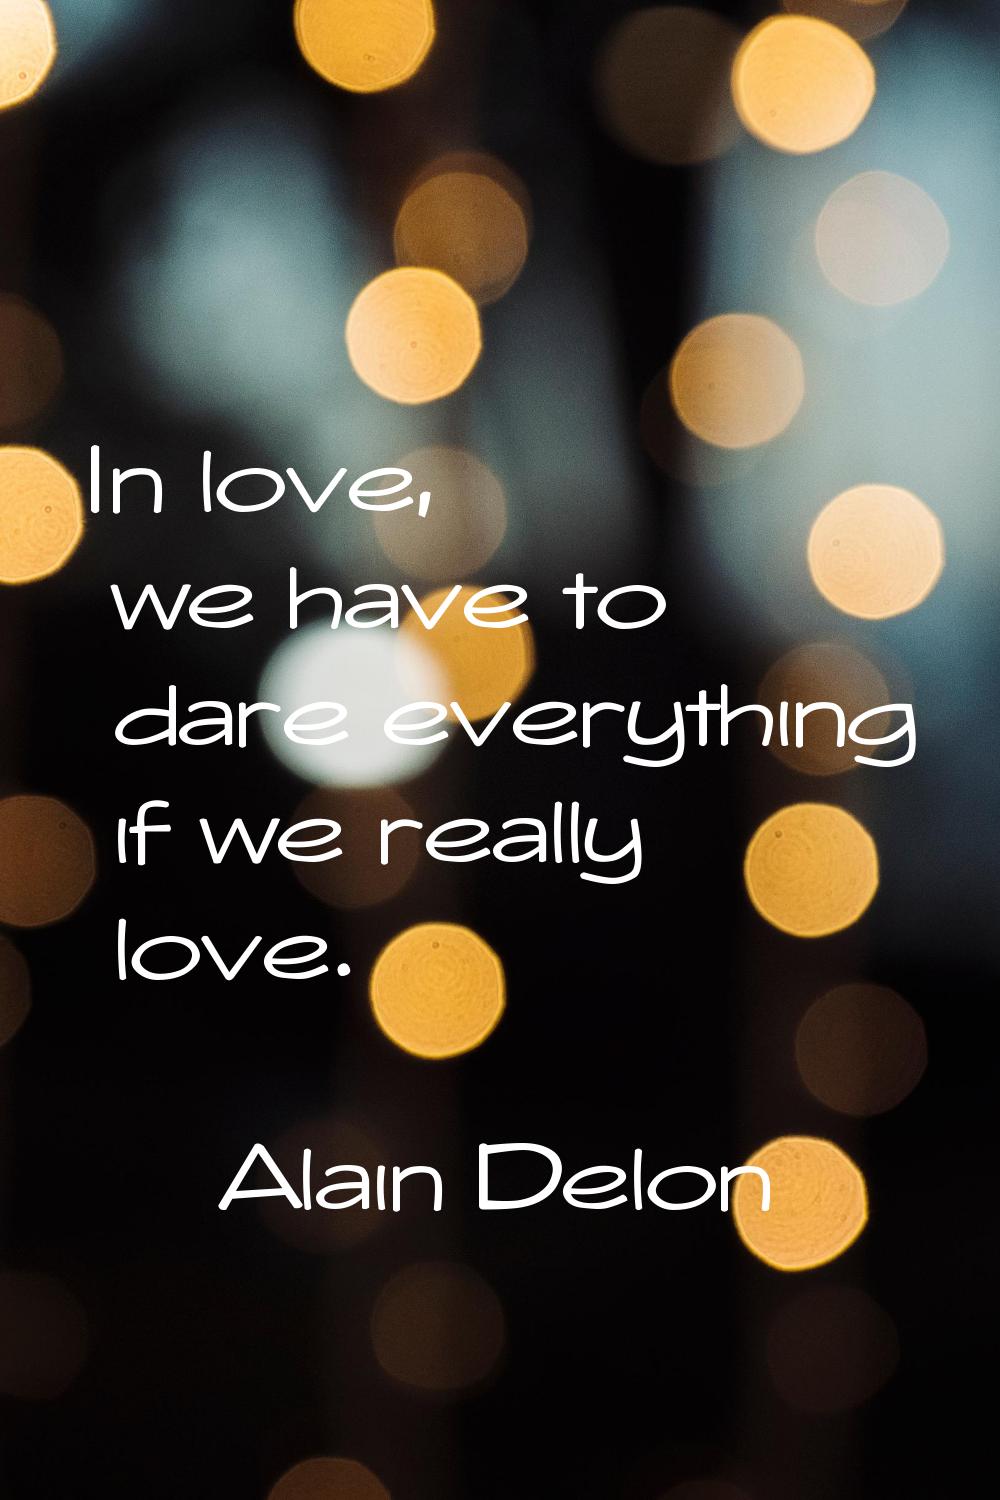 In love, we have to dare everything if we really love.